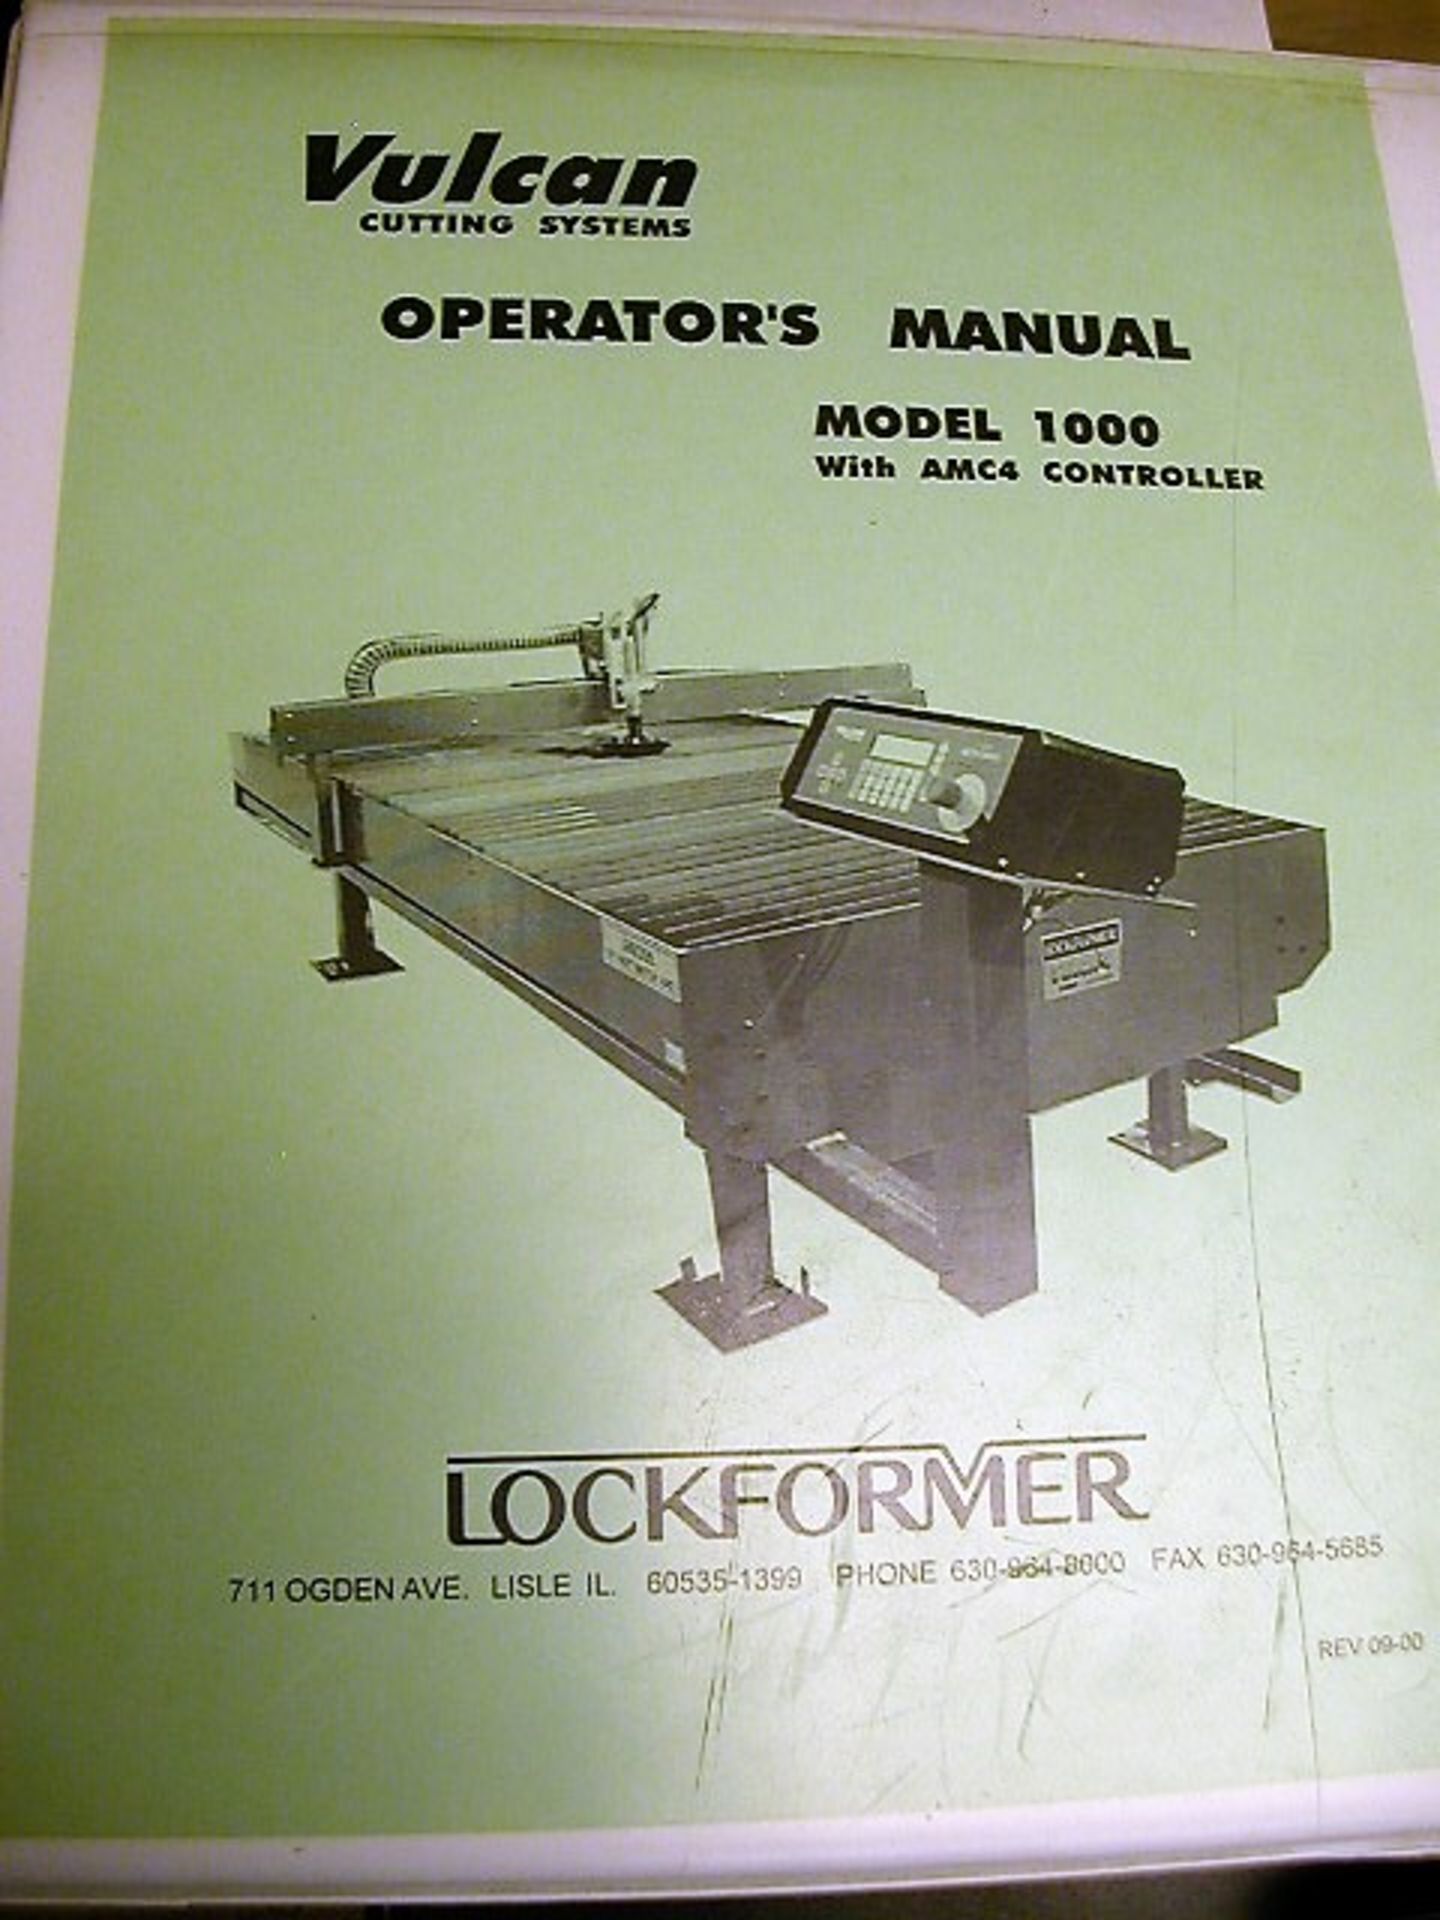 Lockformer Vulcan 1000 Cutting Systems with AMC4 Controller. Computerized 10'x5' Sheet Metal Table - Image 4 of 14